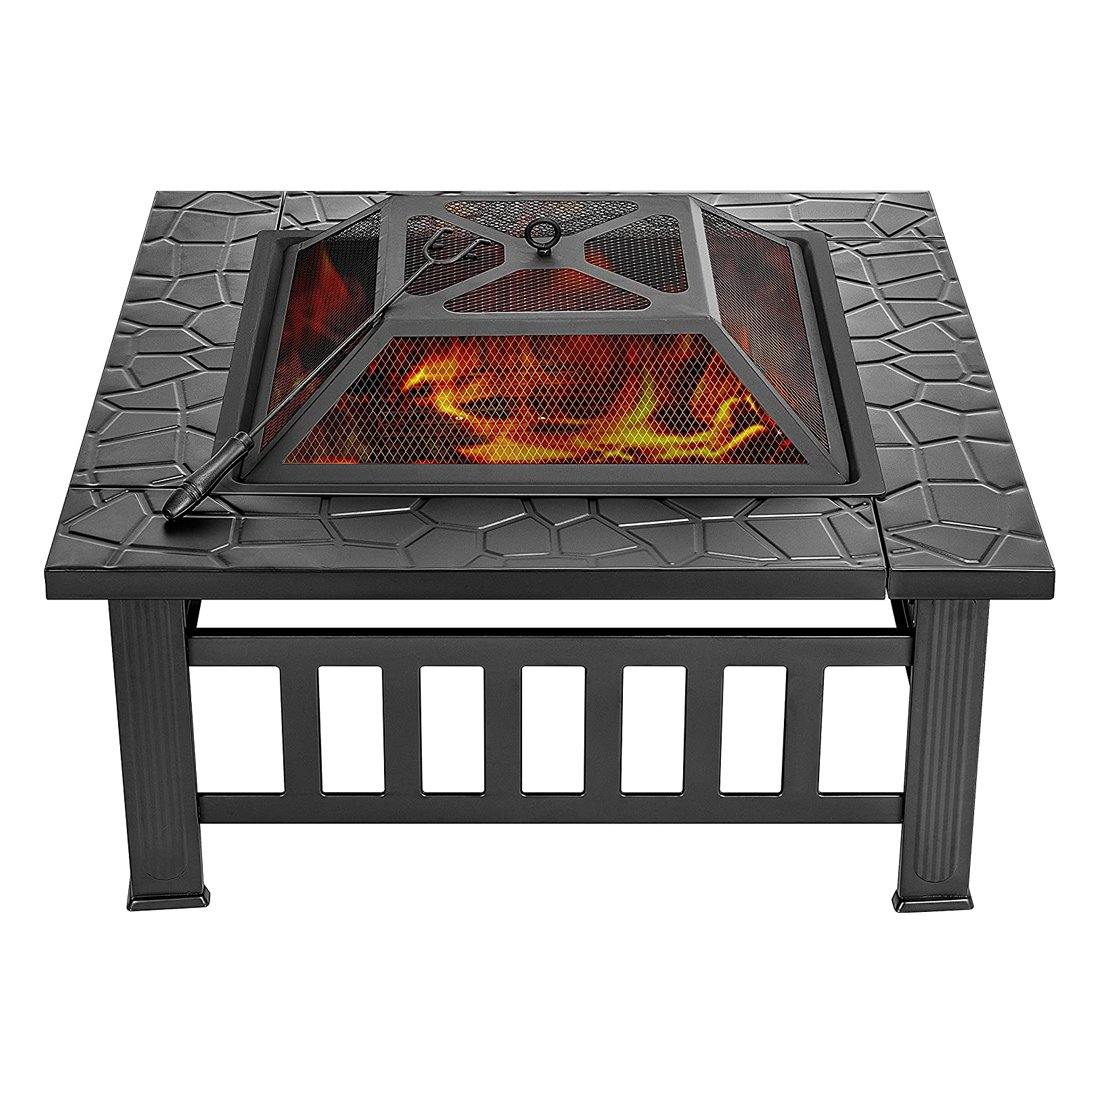 VIVOHOME Metal Cooking Fire Grate for Fire Pit Stove Log Table BBQ Patio Garden